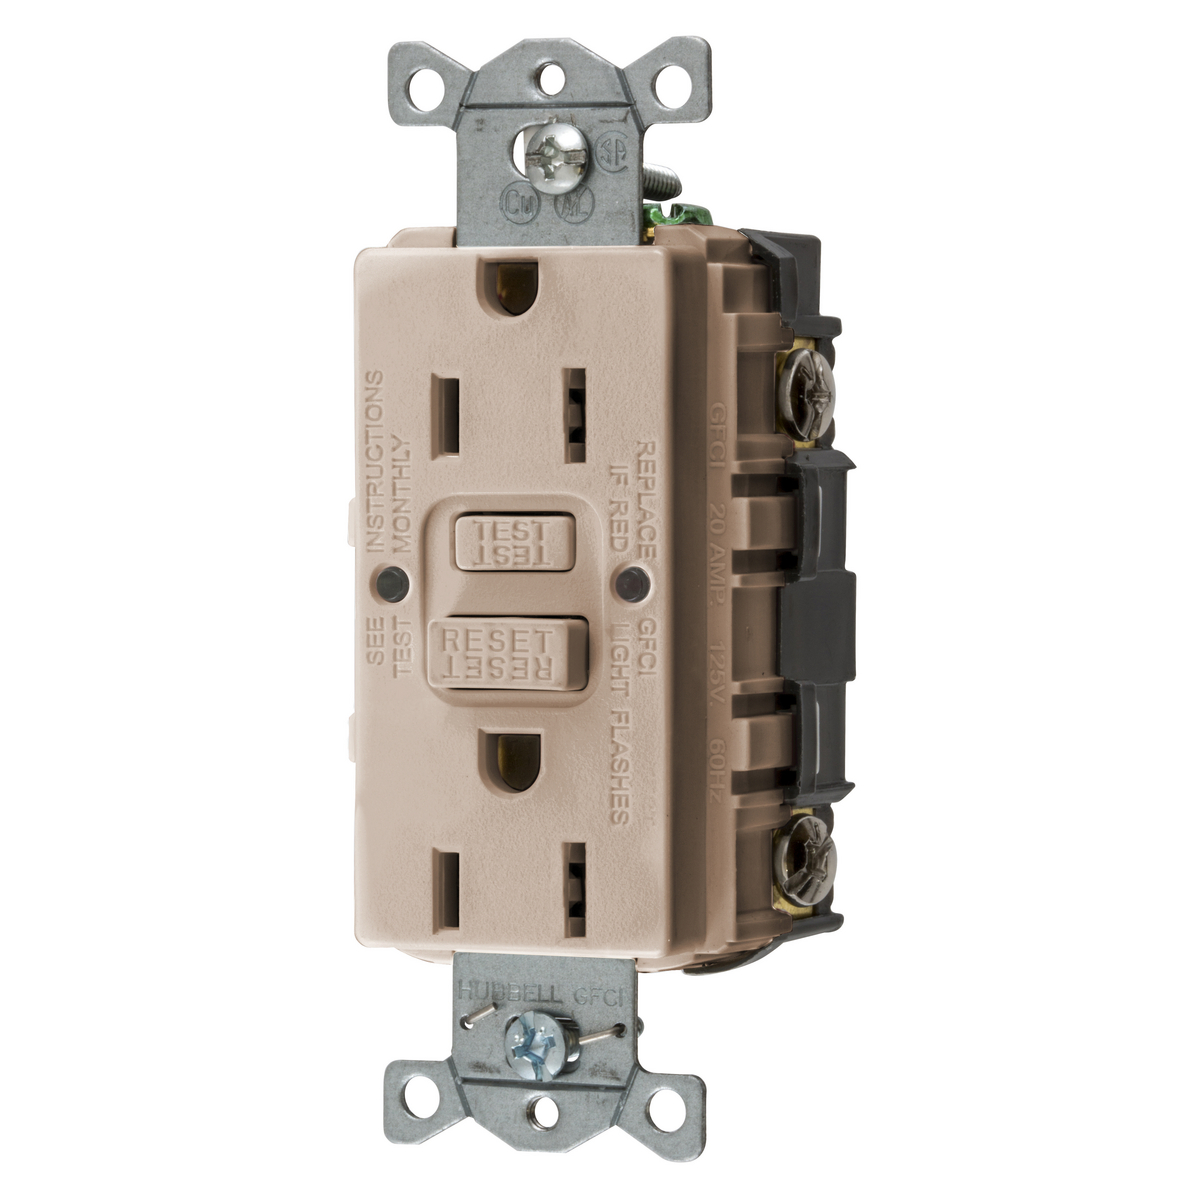 Gfci Receptacle, 15A 125V, 2-Pole 3-Wire Grounding, 5-15R, Almond